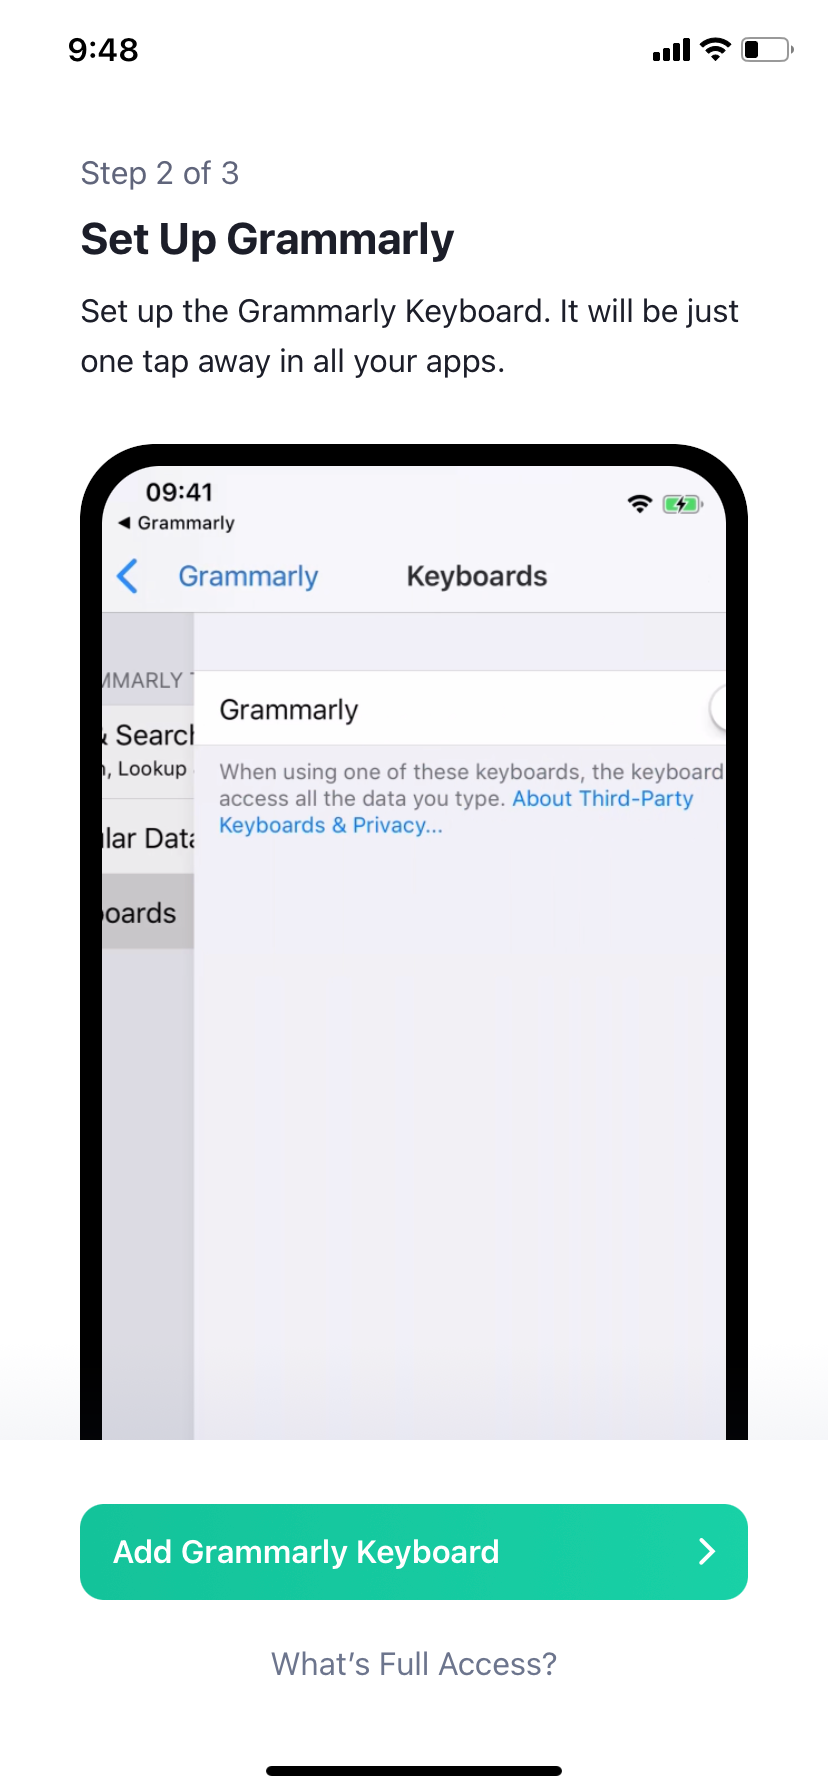 Image shows the set up screen for Grammarly Keyboard on iPhone